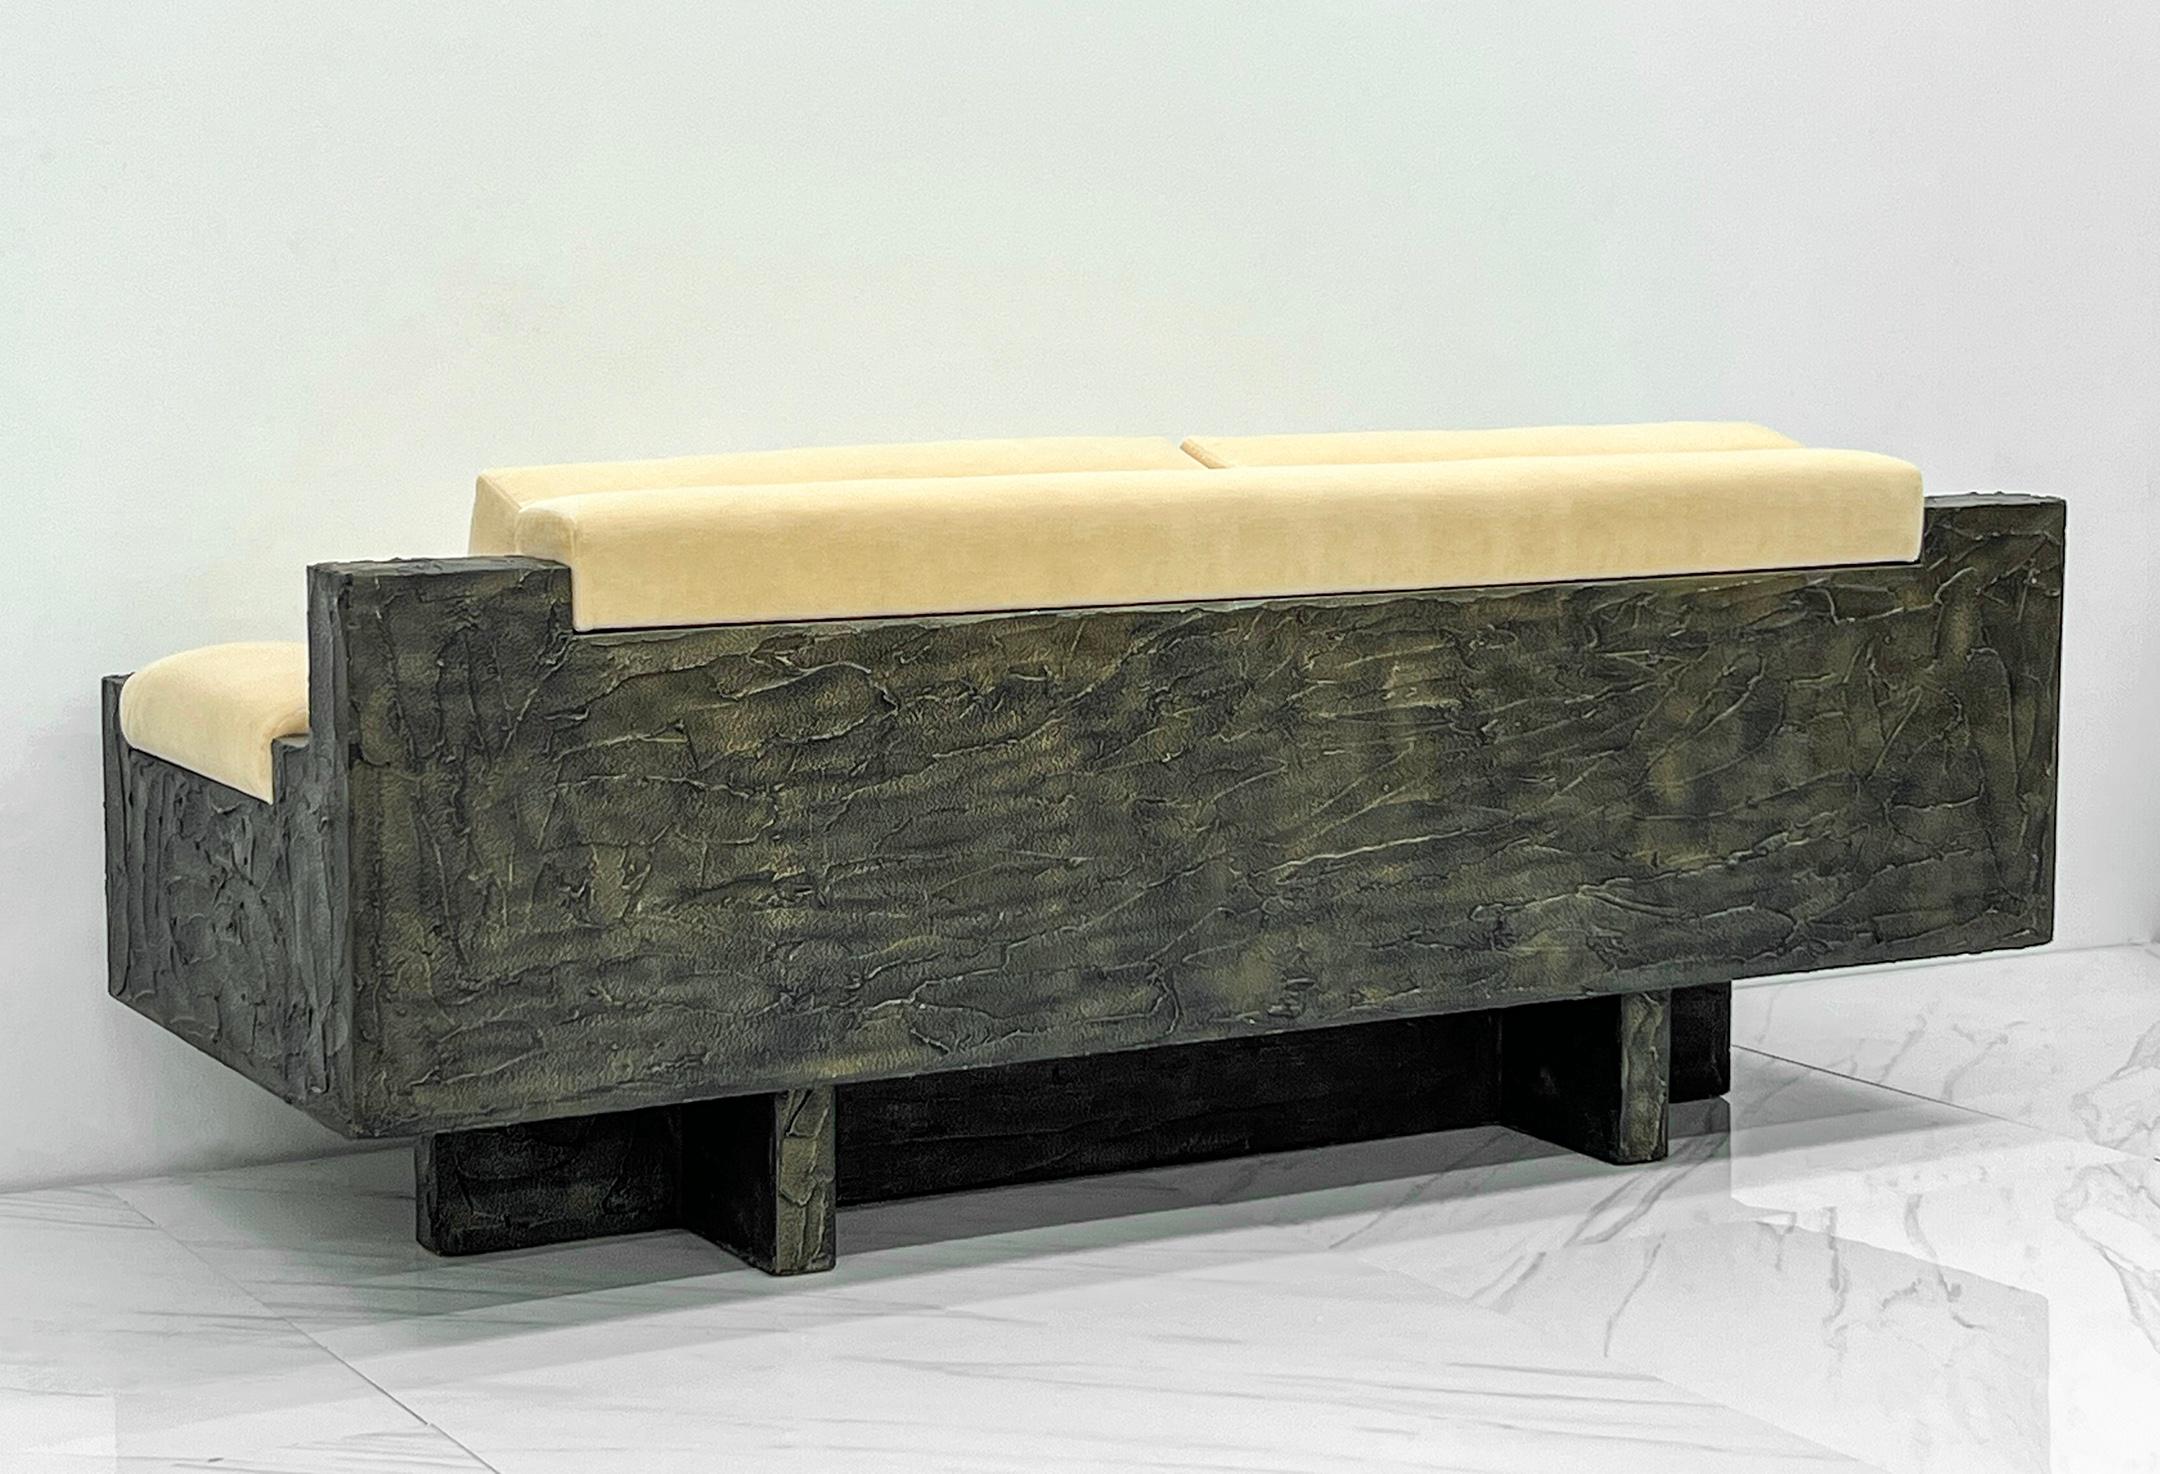 Late 20th Century Important Paul Evans Studio Sculpted Bronze and Resin Sofa, Signed, 1971 For Sale